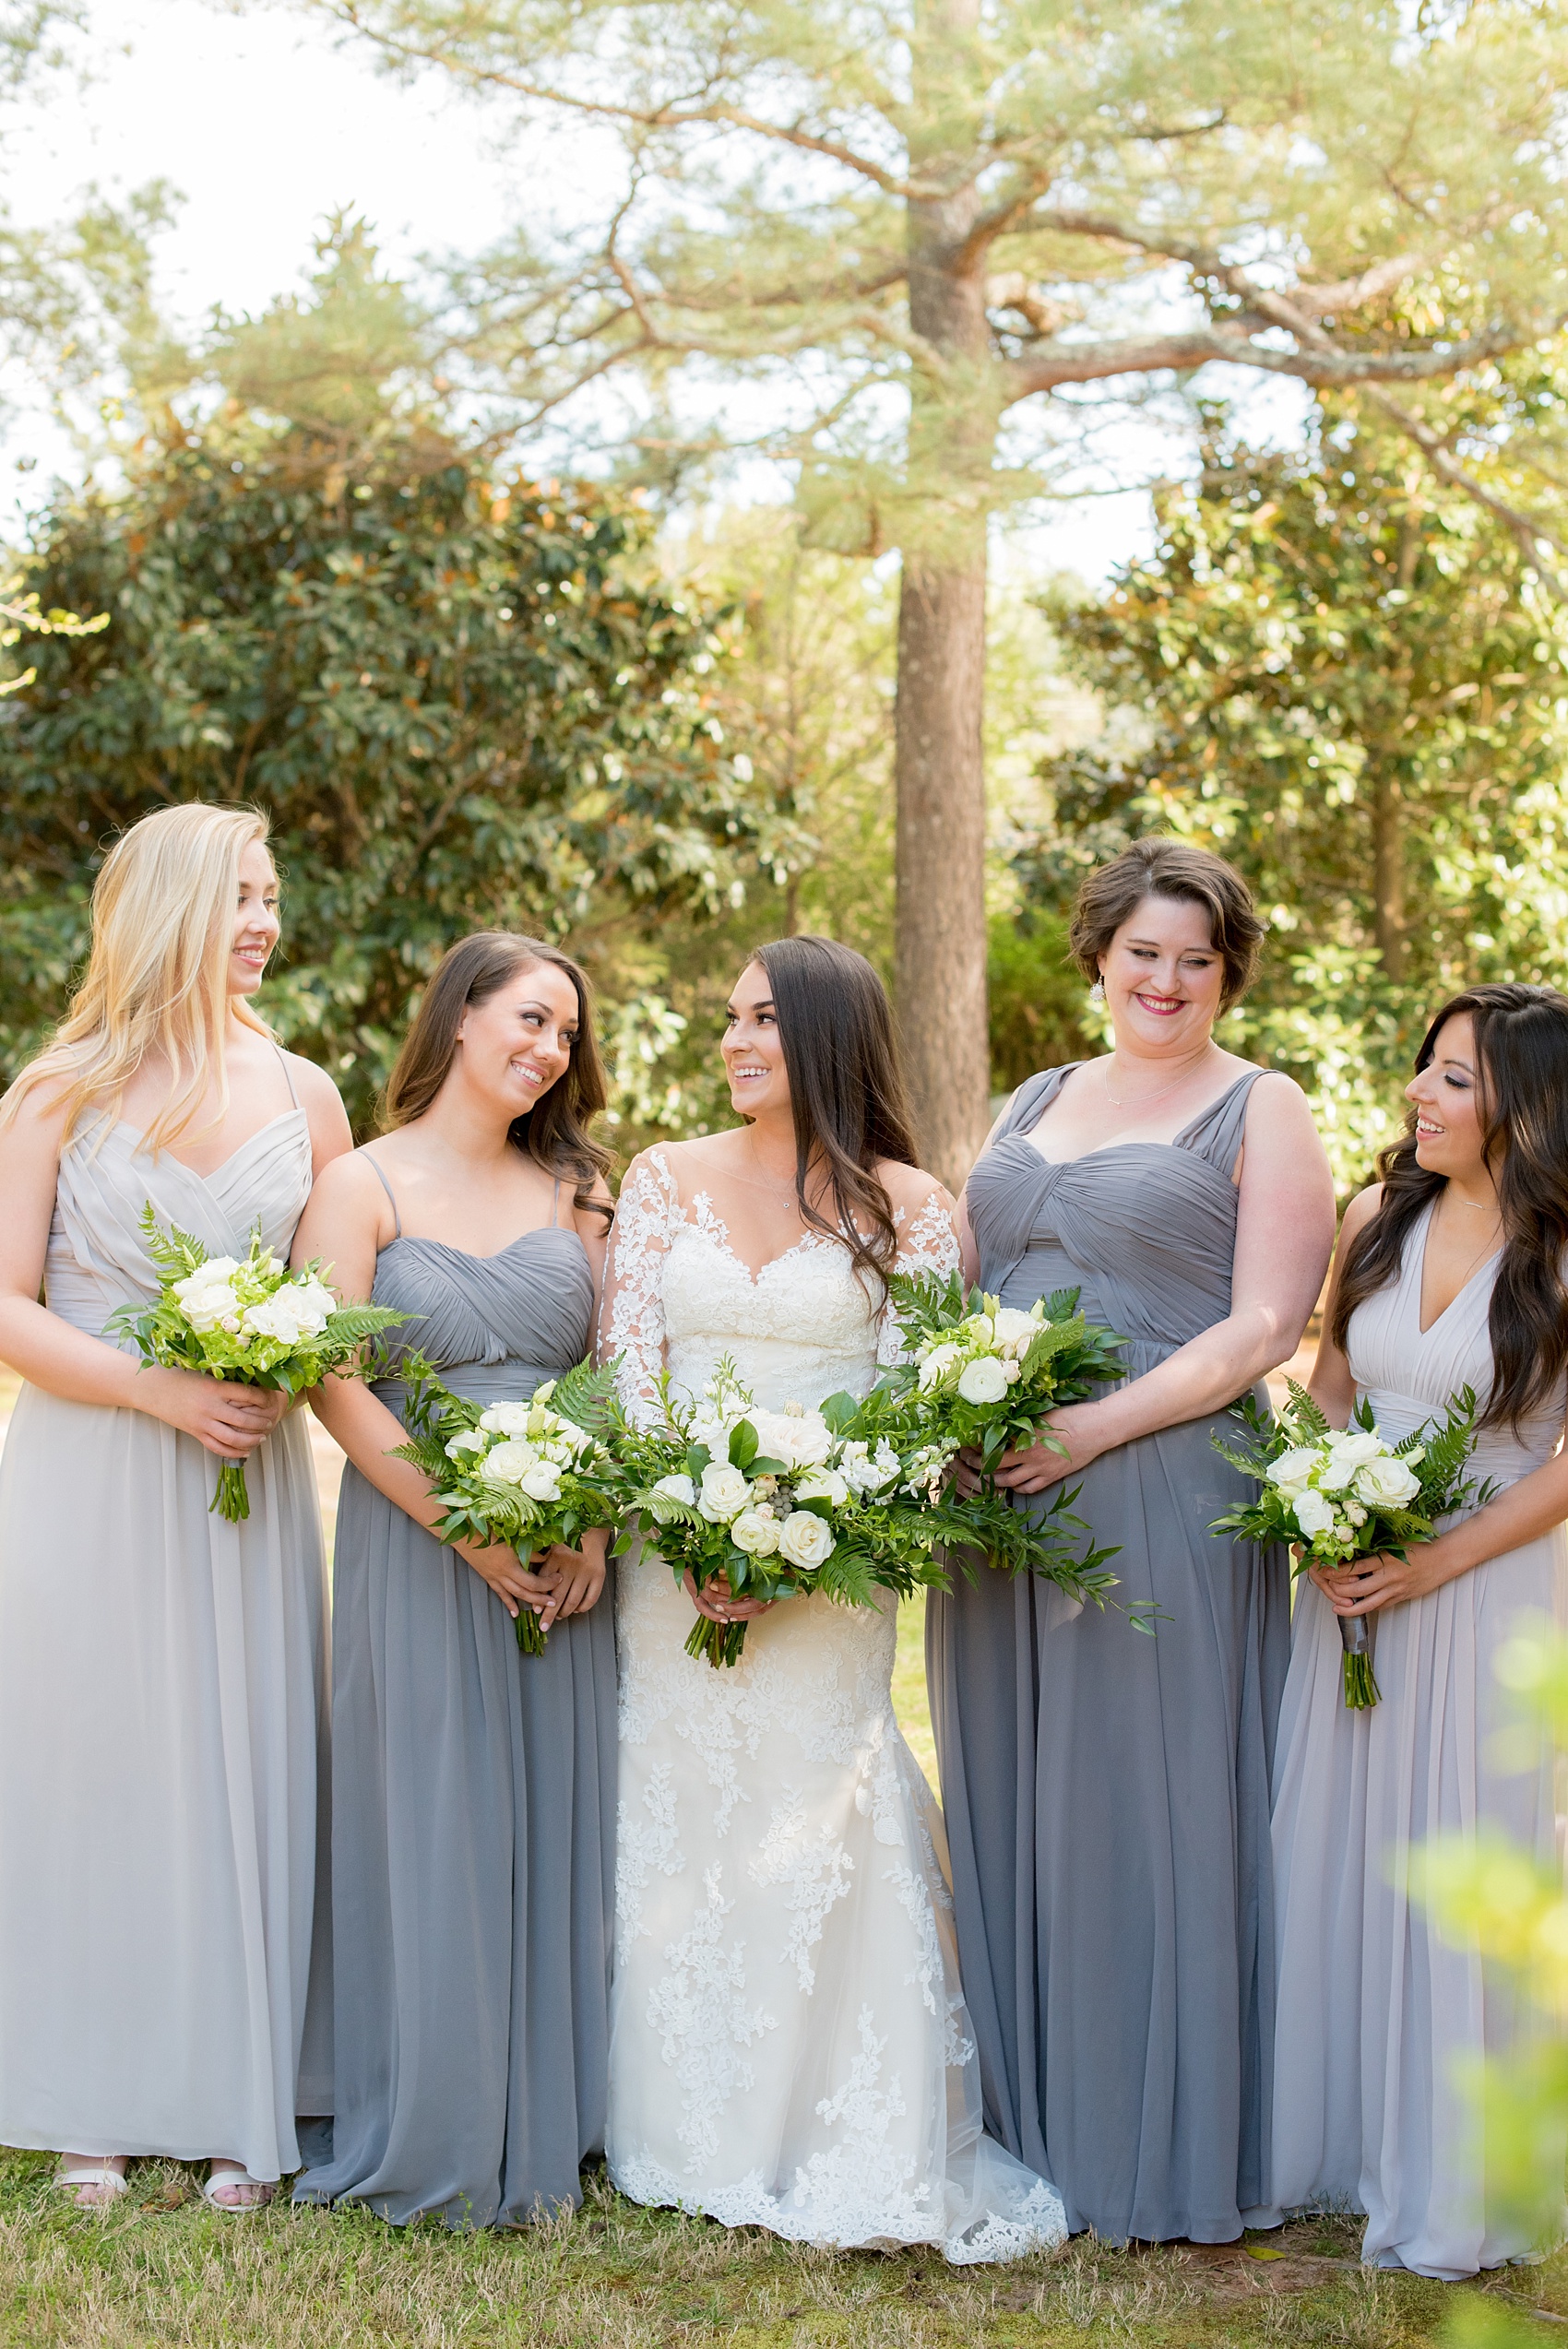 The Sutherland Wedding Photos by Mikkel Paige Photography. Candid bridal party picture with the bride in lace Pronovias and bridesmaids party in various shades of grey gowns. Planning by A Southern Soiree.